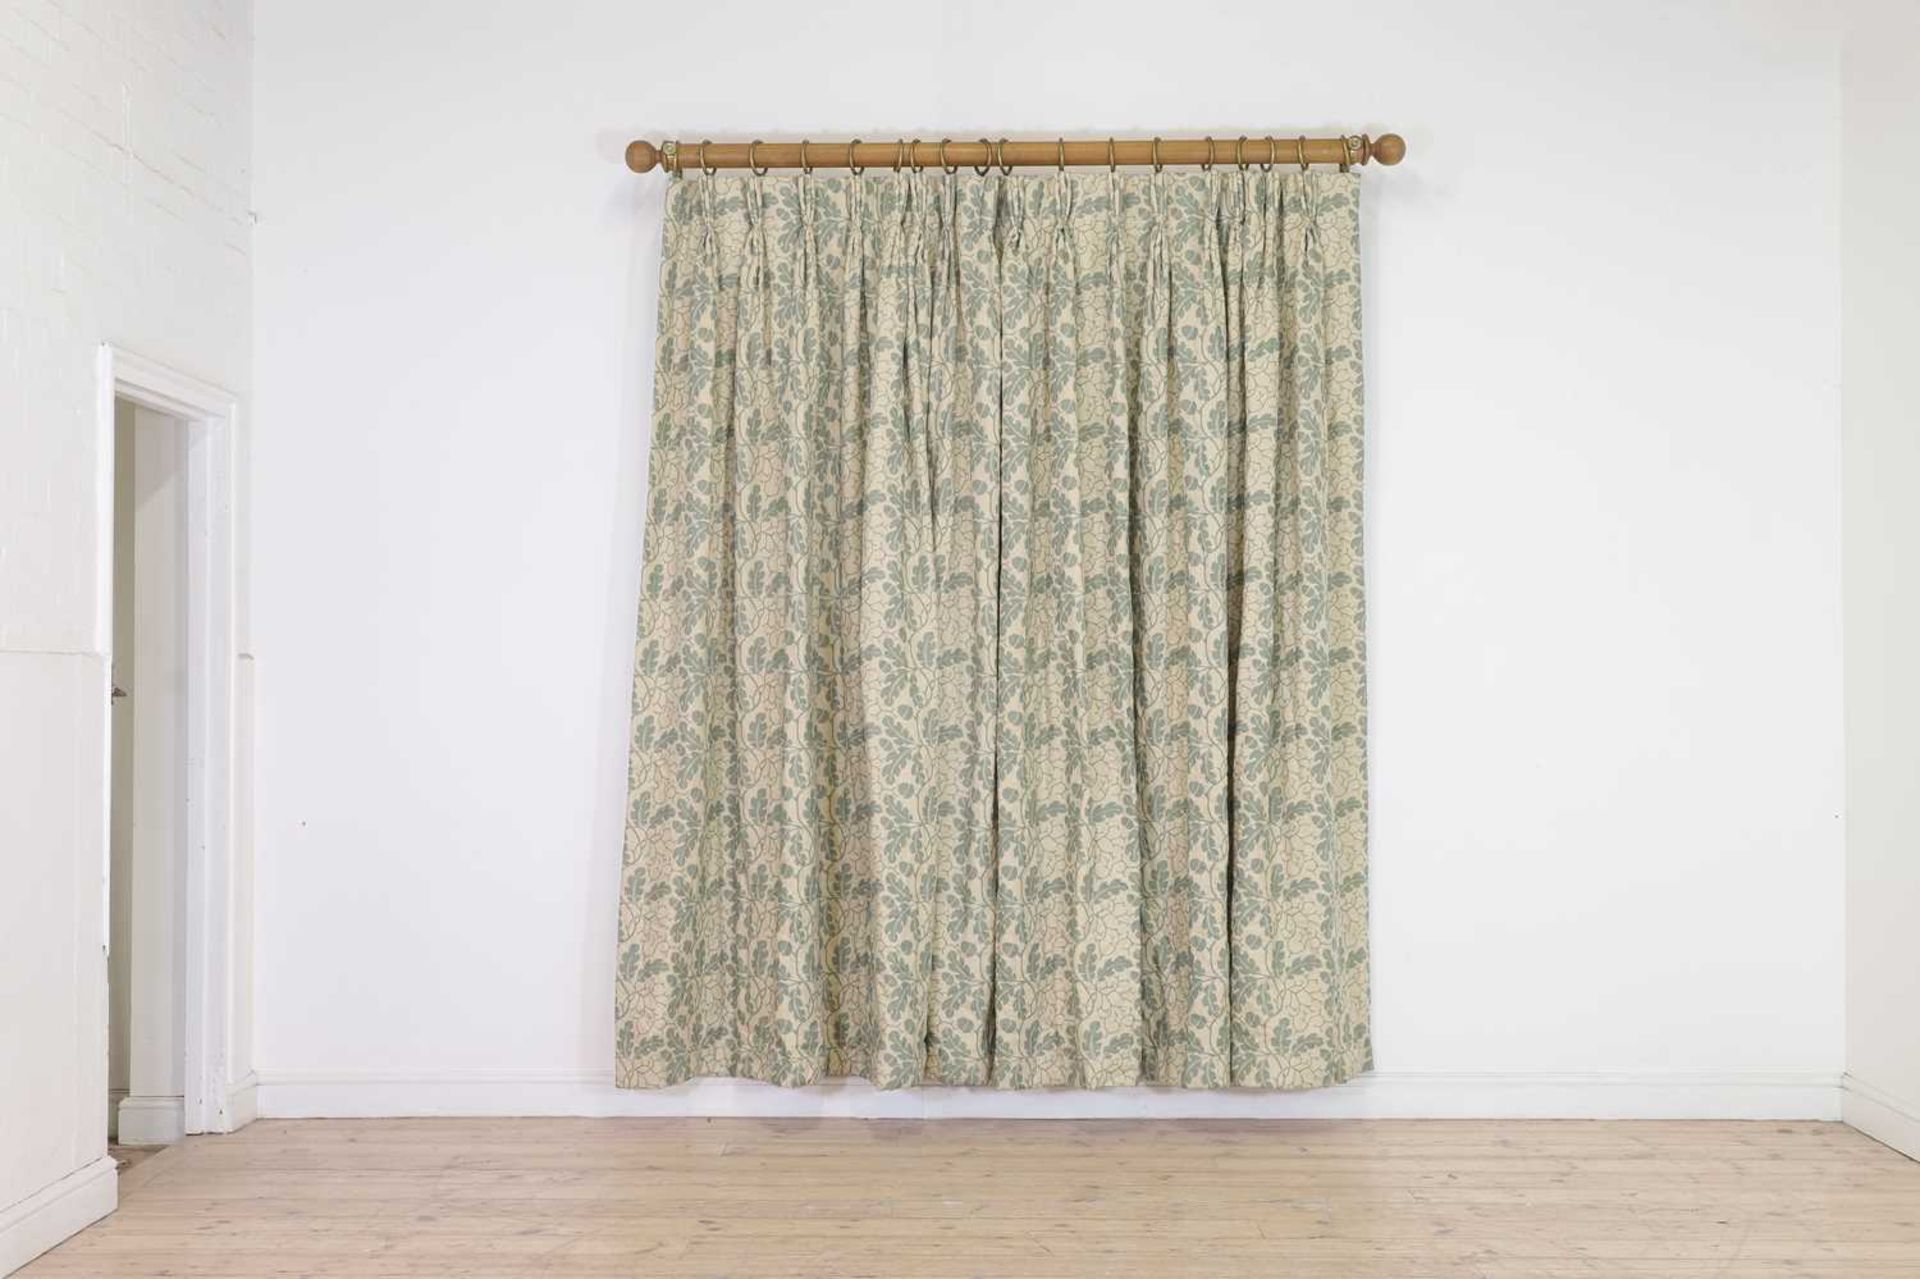 Two pairs of 'Oak Leaves' curtains by Robert Kime, - Image 3 of 14